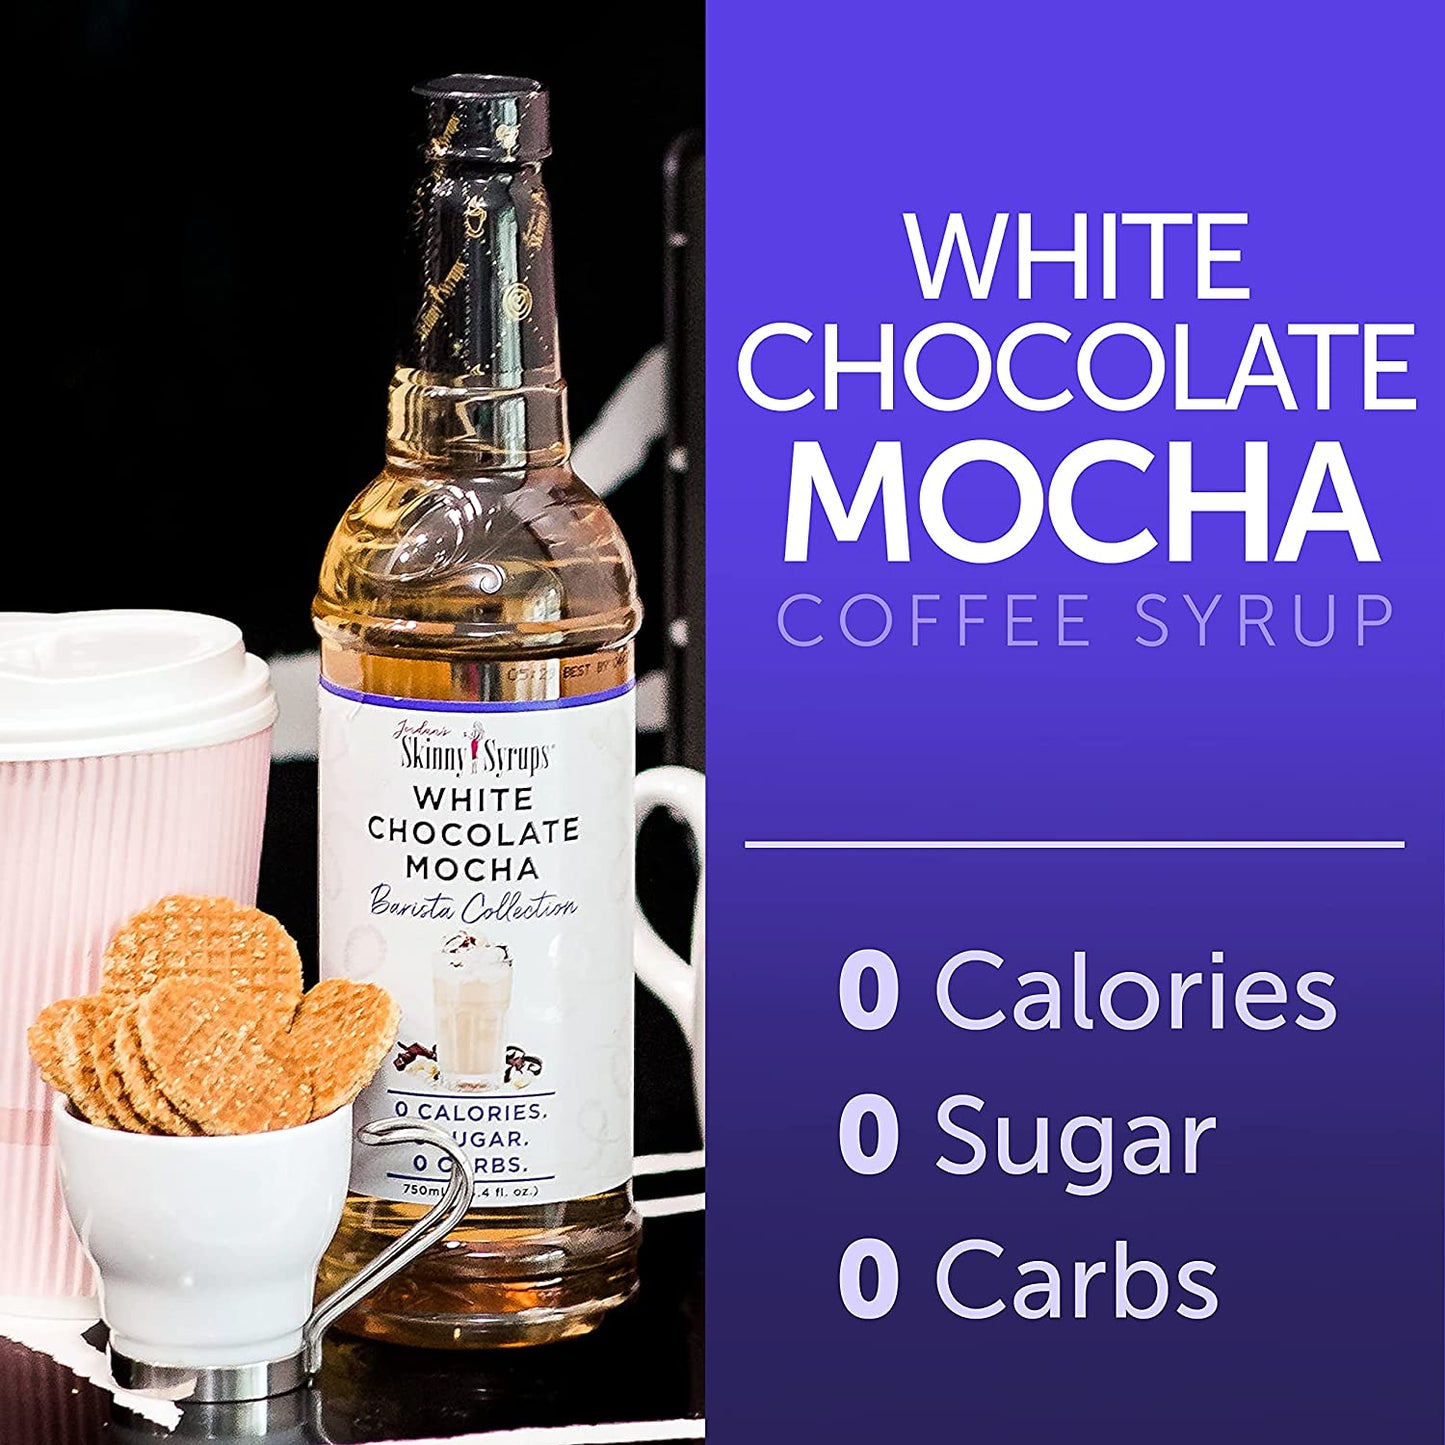 Jordan's Skinny Mixes Syrups White Chocolate Mocha, Barista Collection Sugar Free Coffee Flavoring Syrup, 25.4 Ounce Bottle